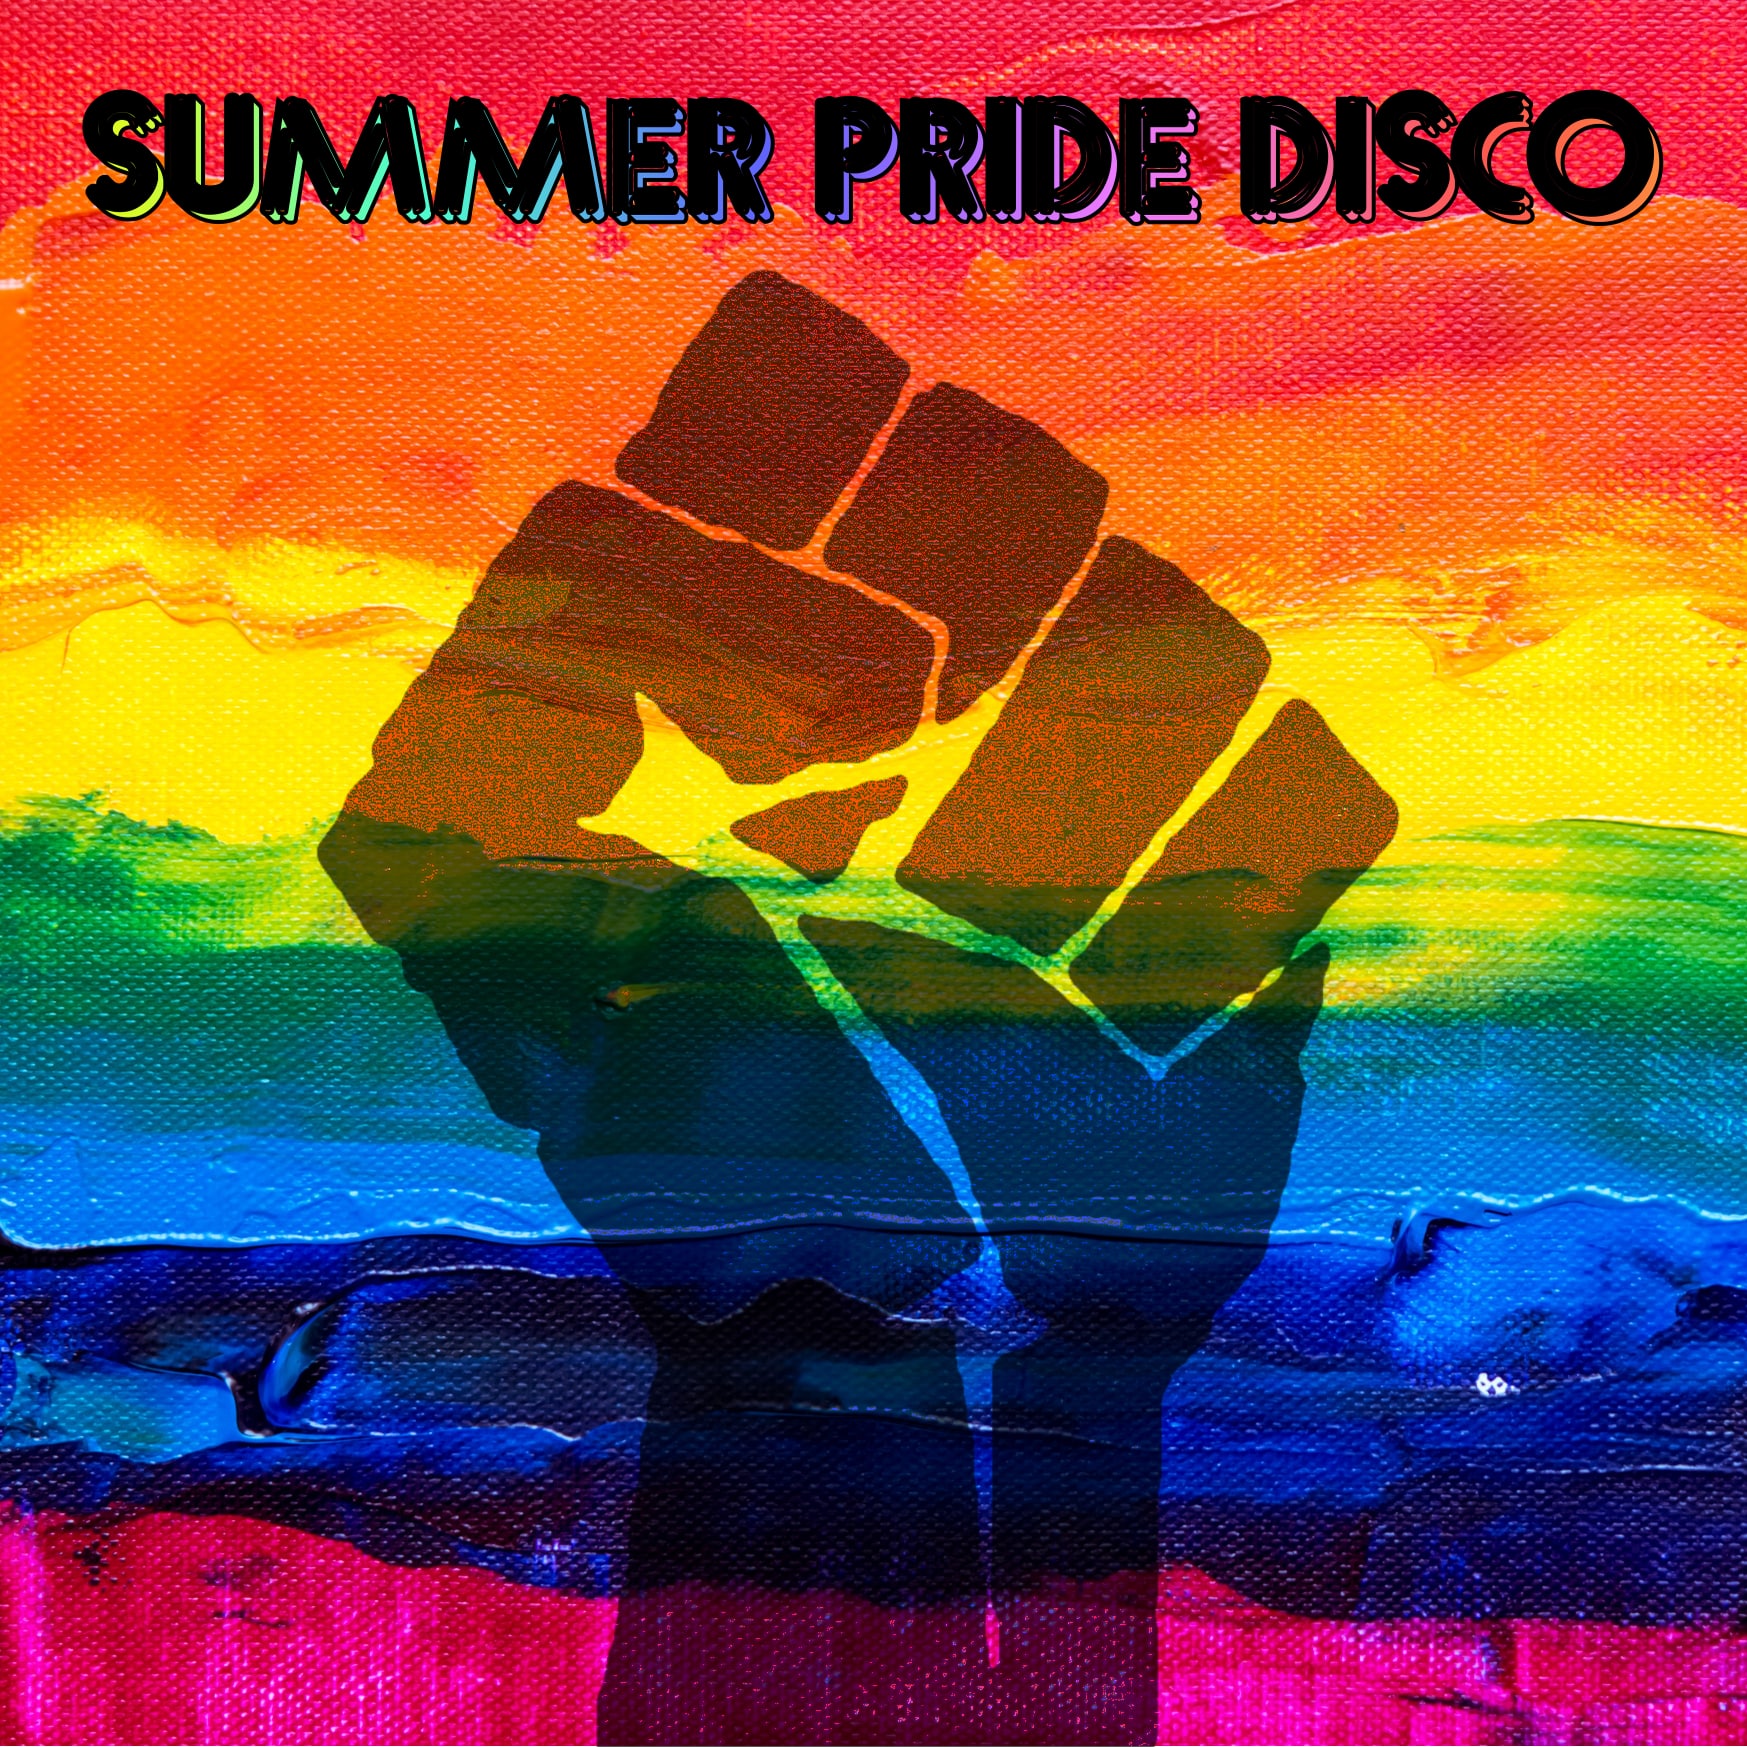 summer pride - Radio Clash Podcast Summer Pride Disco Mix Radio Clash Music Mashup Podcast brings you the best in eclectic tunes, mashups and remixes from around the world. Since 2004, we've been bringing you the freshest and most innovative music from a diverse range of genres and cultures. Join us on our musical journey as we explore the sounds of yesterday, today, and tomorrow. Discover new music and be inspired by the mashup of musical styles that only Radio Clash can provide. Subscribe now to elevate your musical experience!